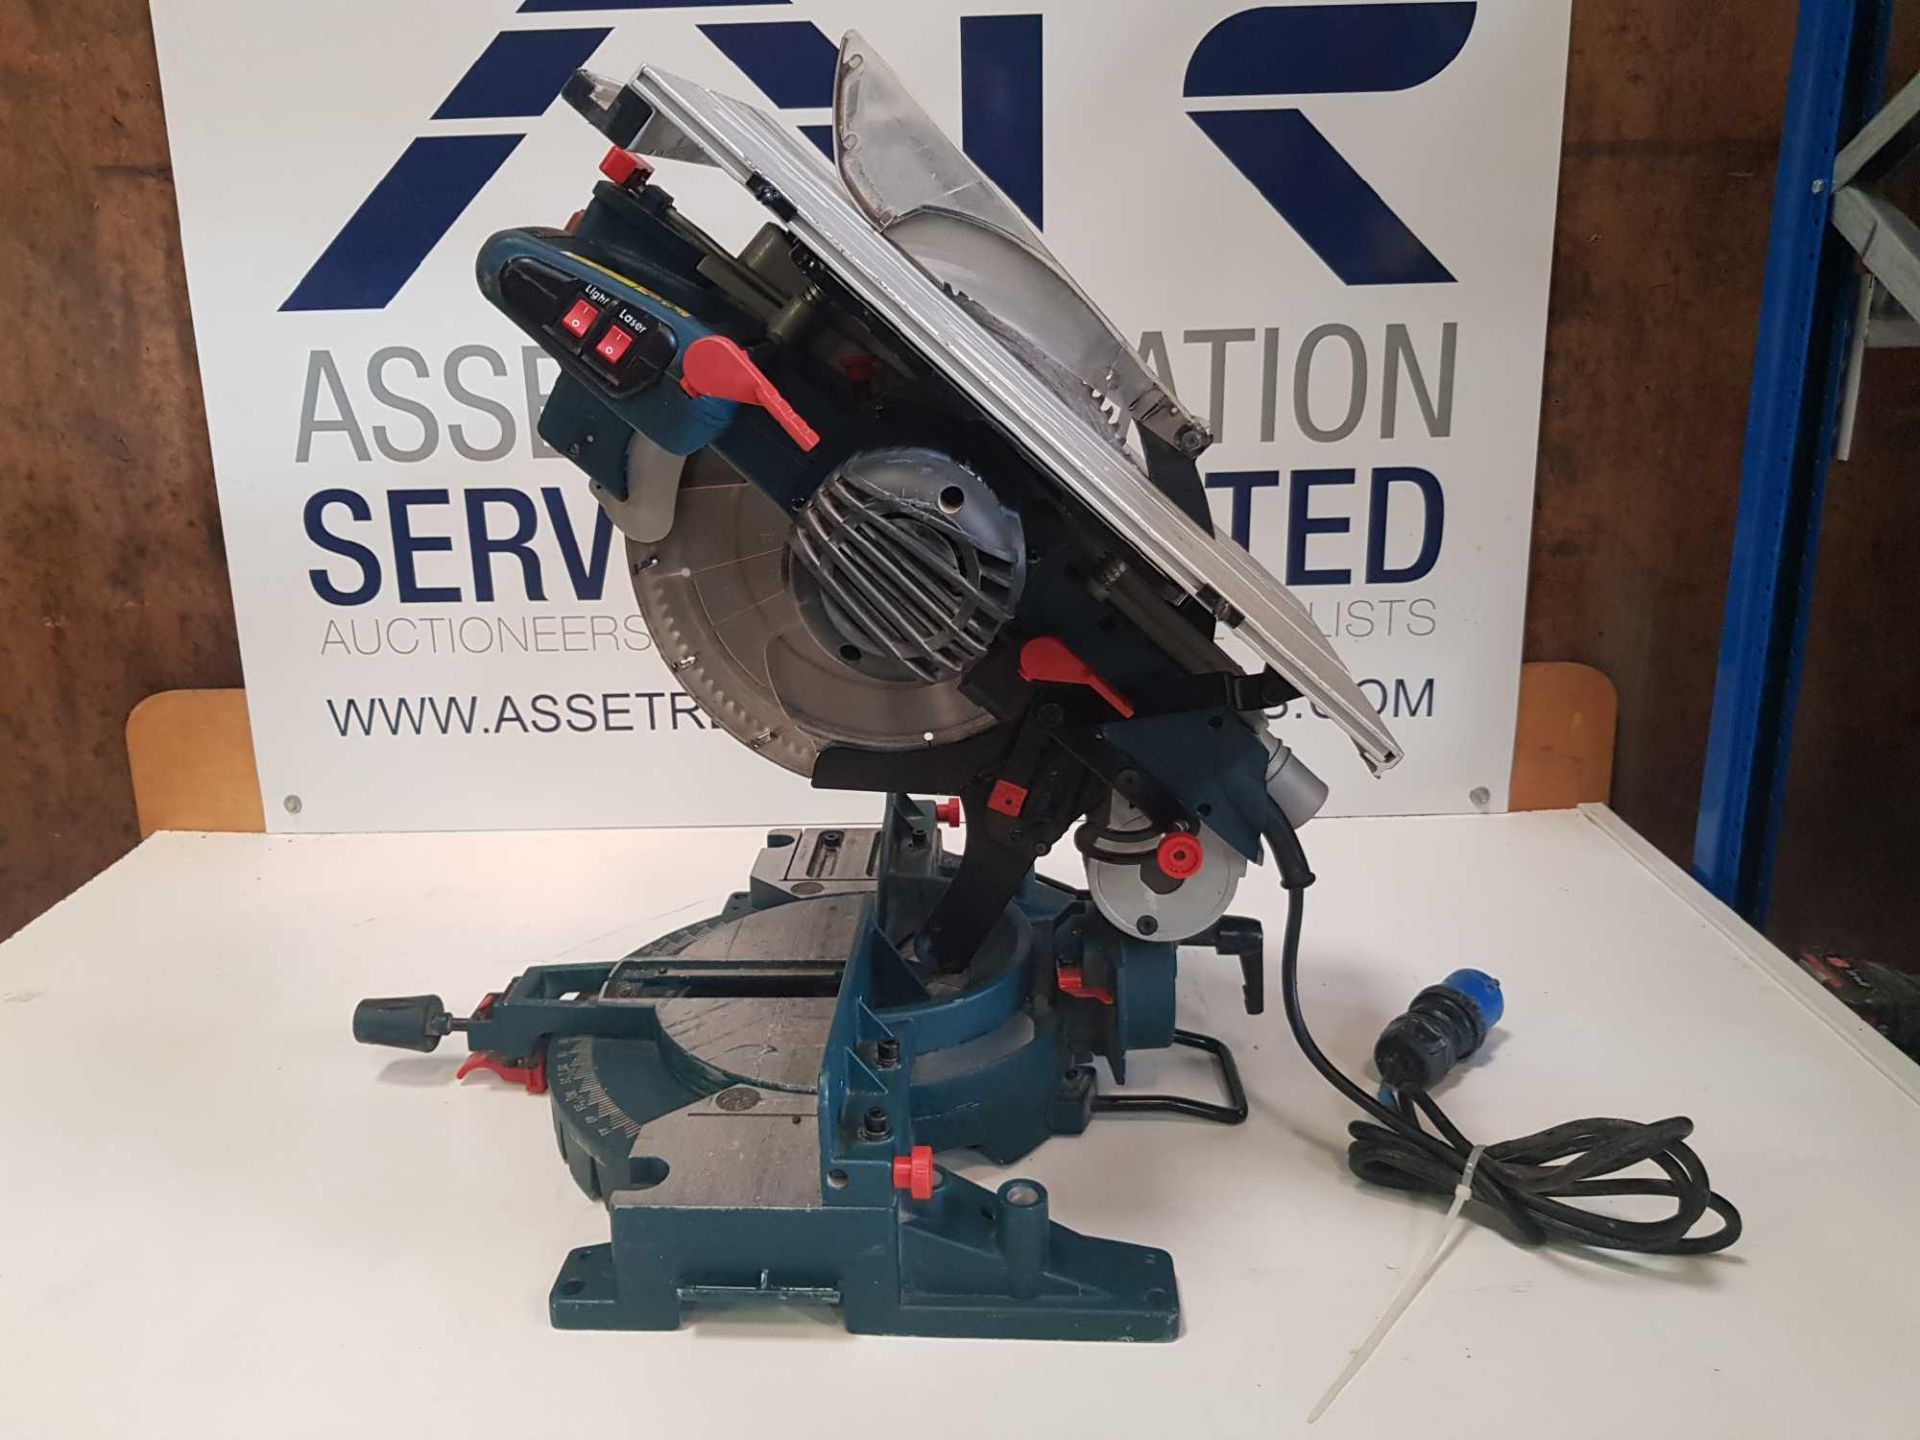 Bosch GTM 12 JL 305mm Table Mitre Saw